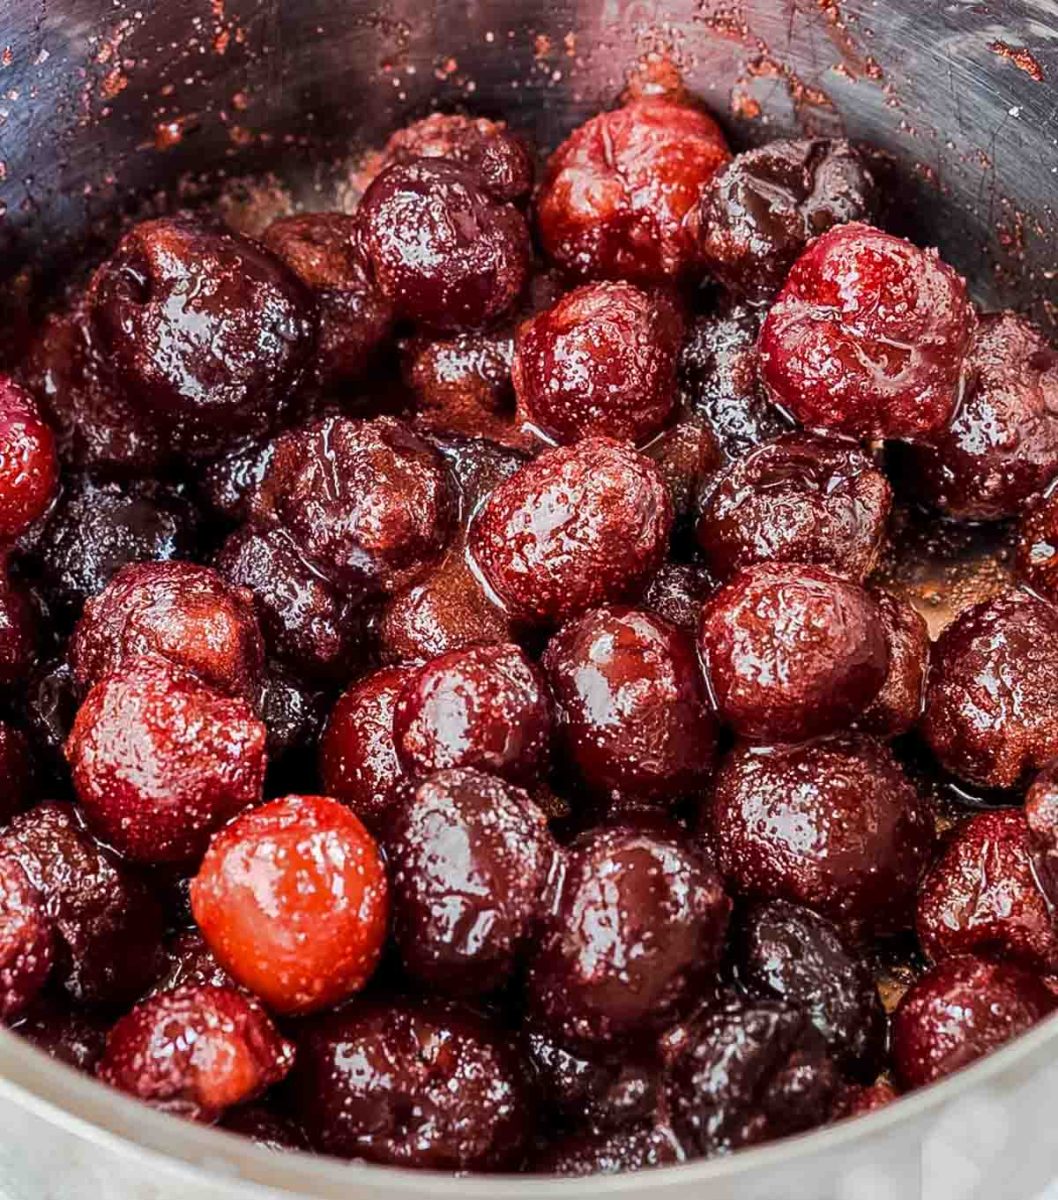 Top down view of cherries mixed with sugar cooking in a saucepan - hostess at heart